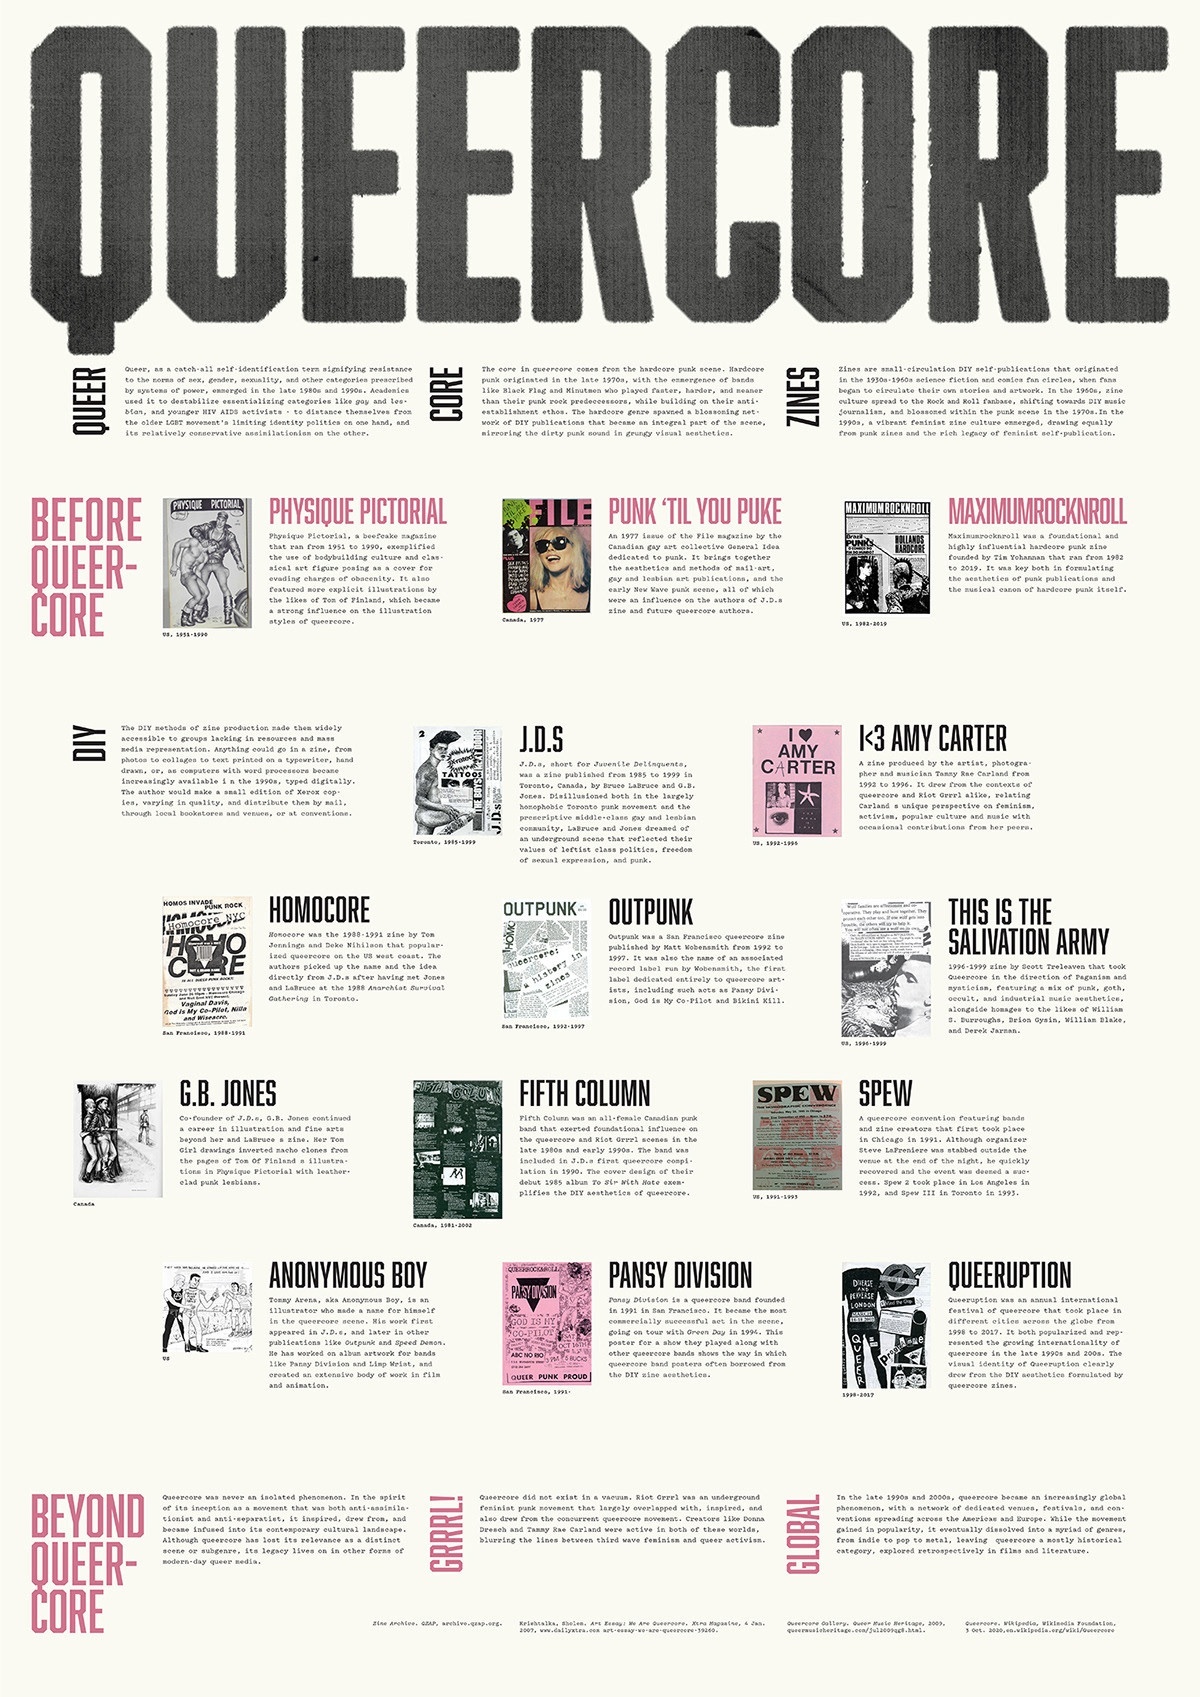 Poster with title "Queercore" with a number of small images with text blocks of descriptions.